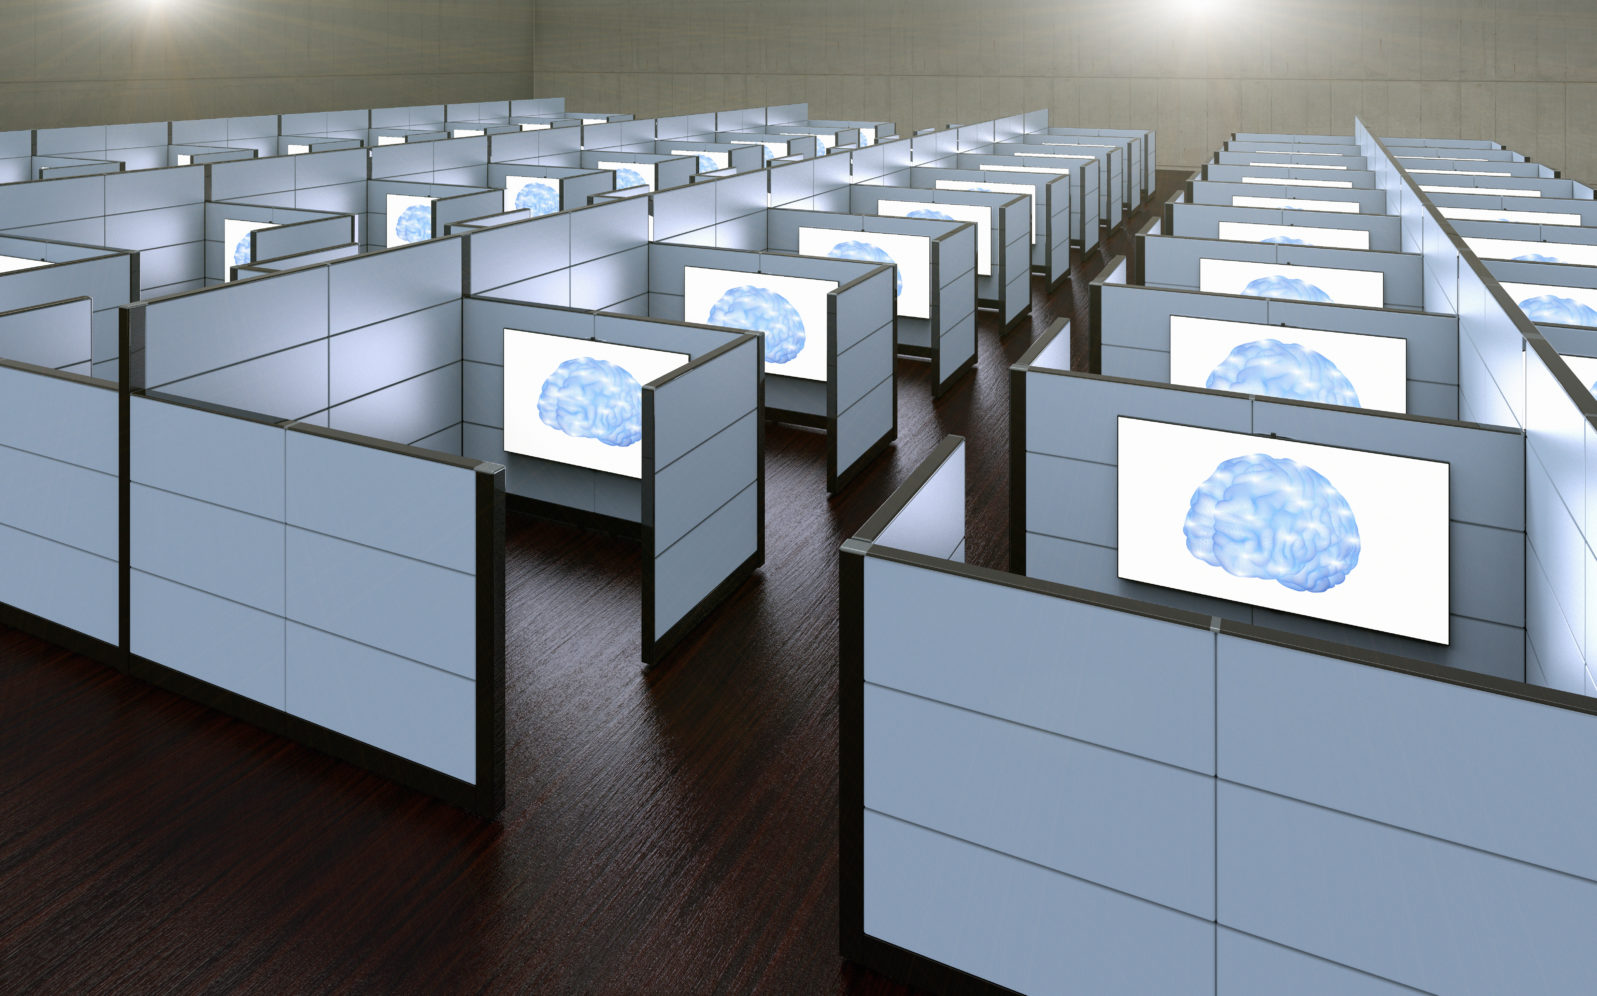 3D rendering of a conceptual images of office cubicles where workers where replaced by artificial intelligence.